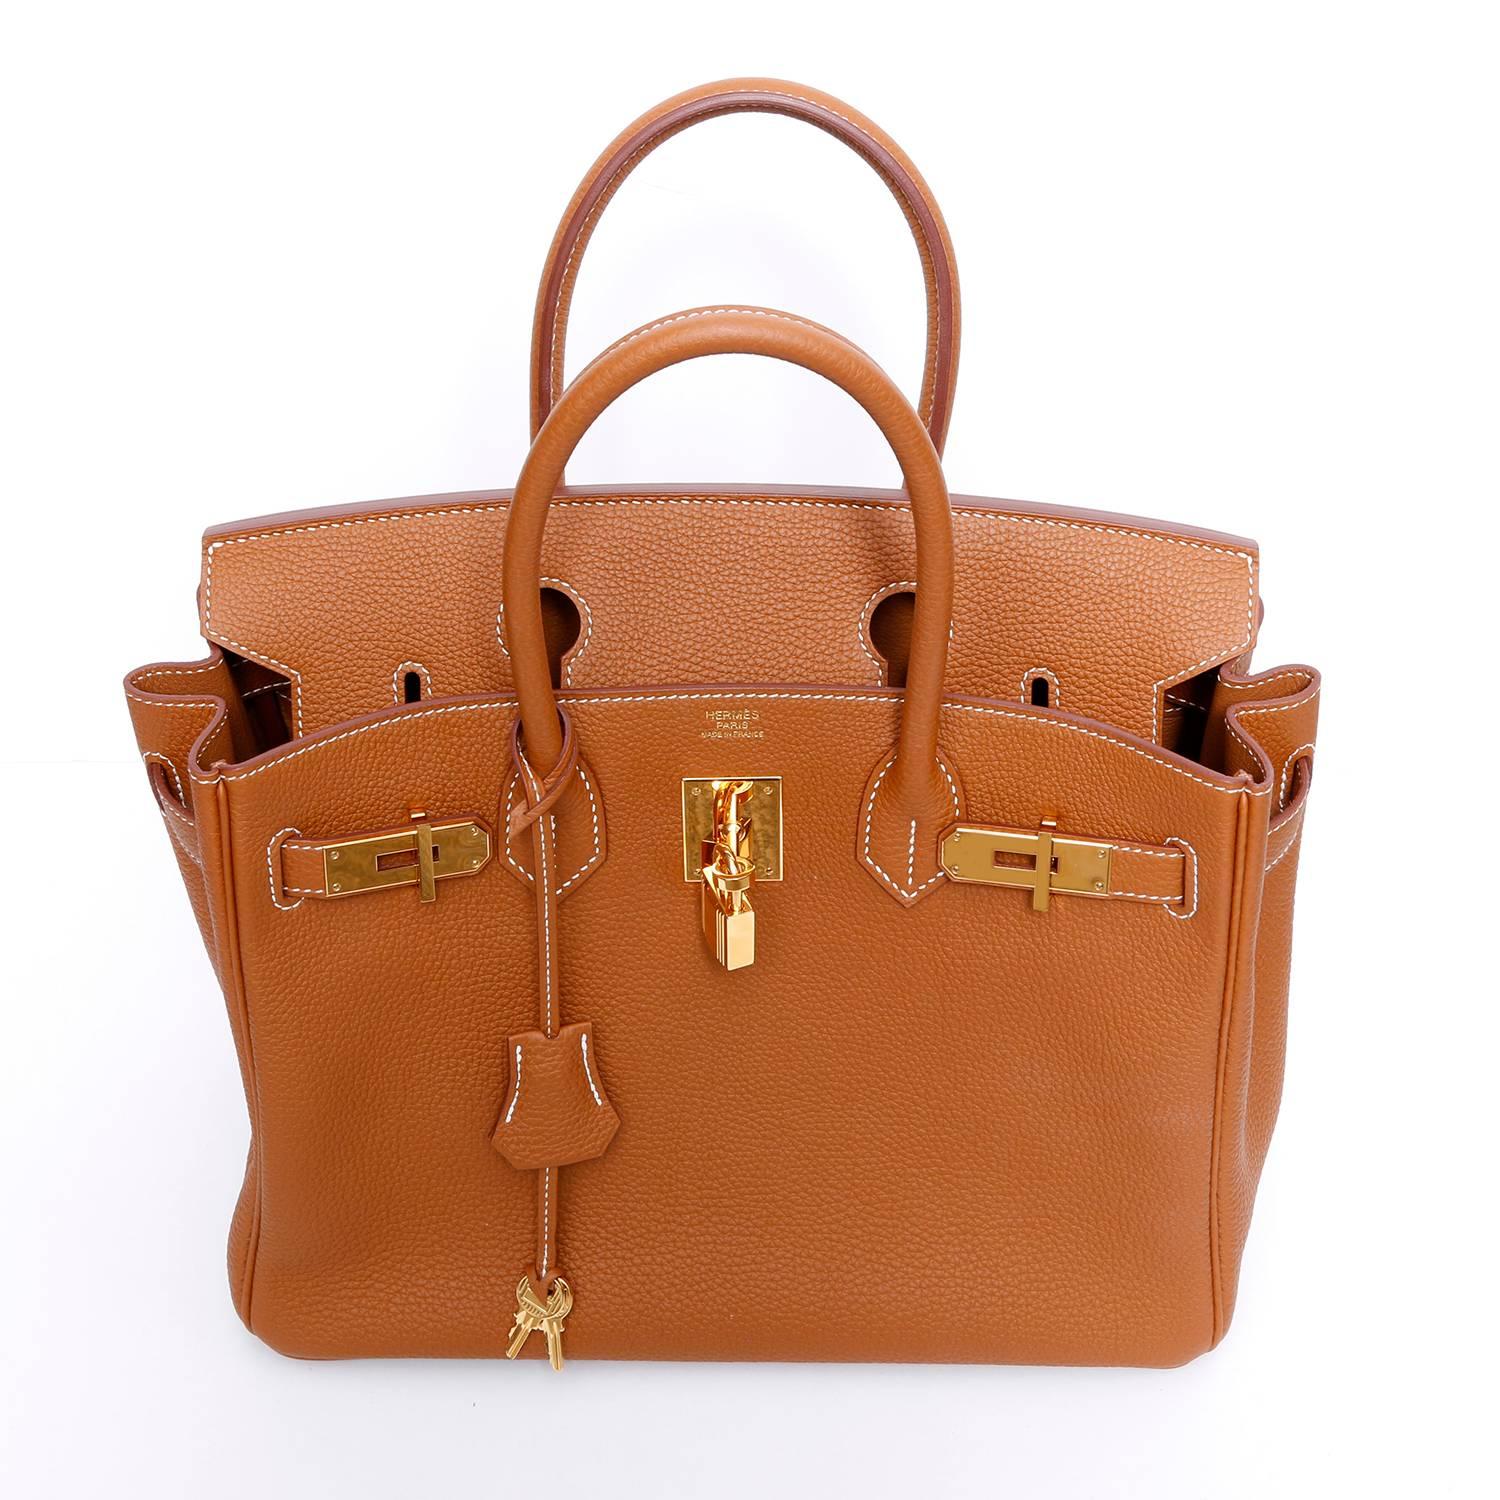  Hermes Togo Gold Birkin 30 - 2016 - . Beautiful Togo gold leather from the 2016 collection with gold hardware. Chevre leather lining, dual pockets inside. Stamped X from 2016. Size 30 cm. Light new. Carried twice. No rubbing on handle, impeccable